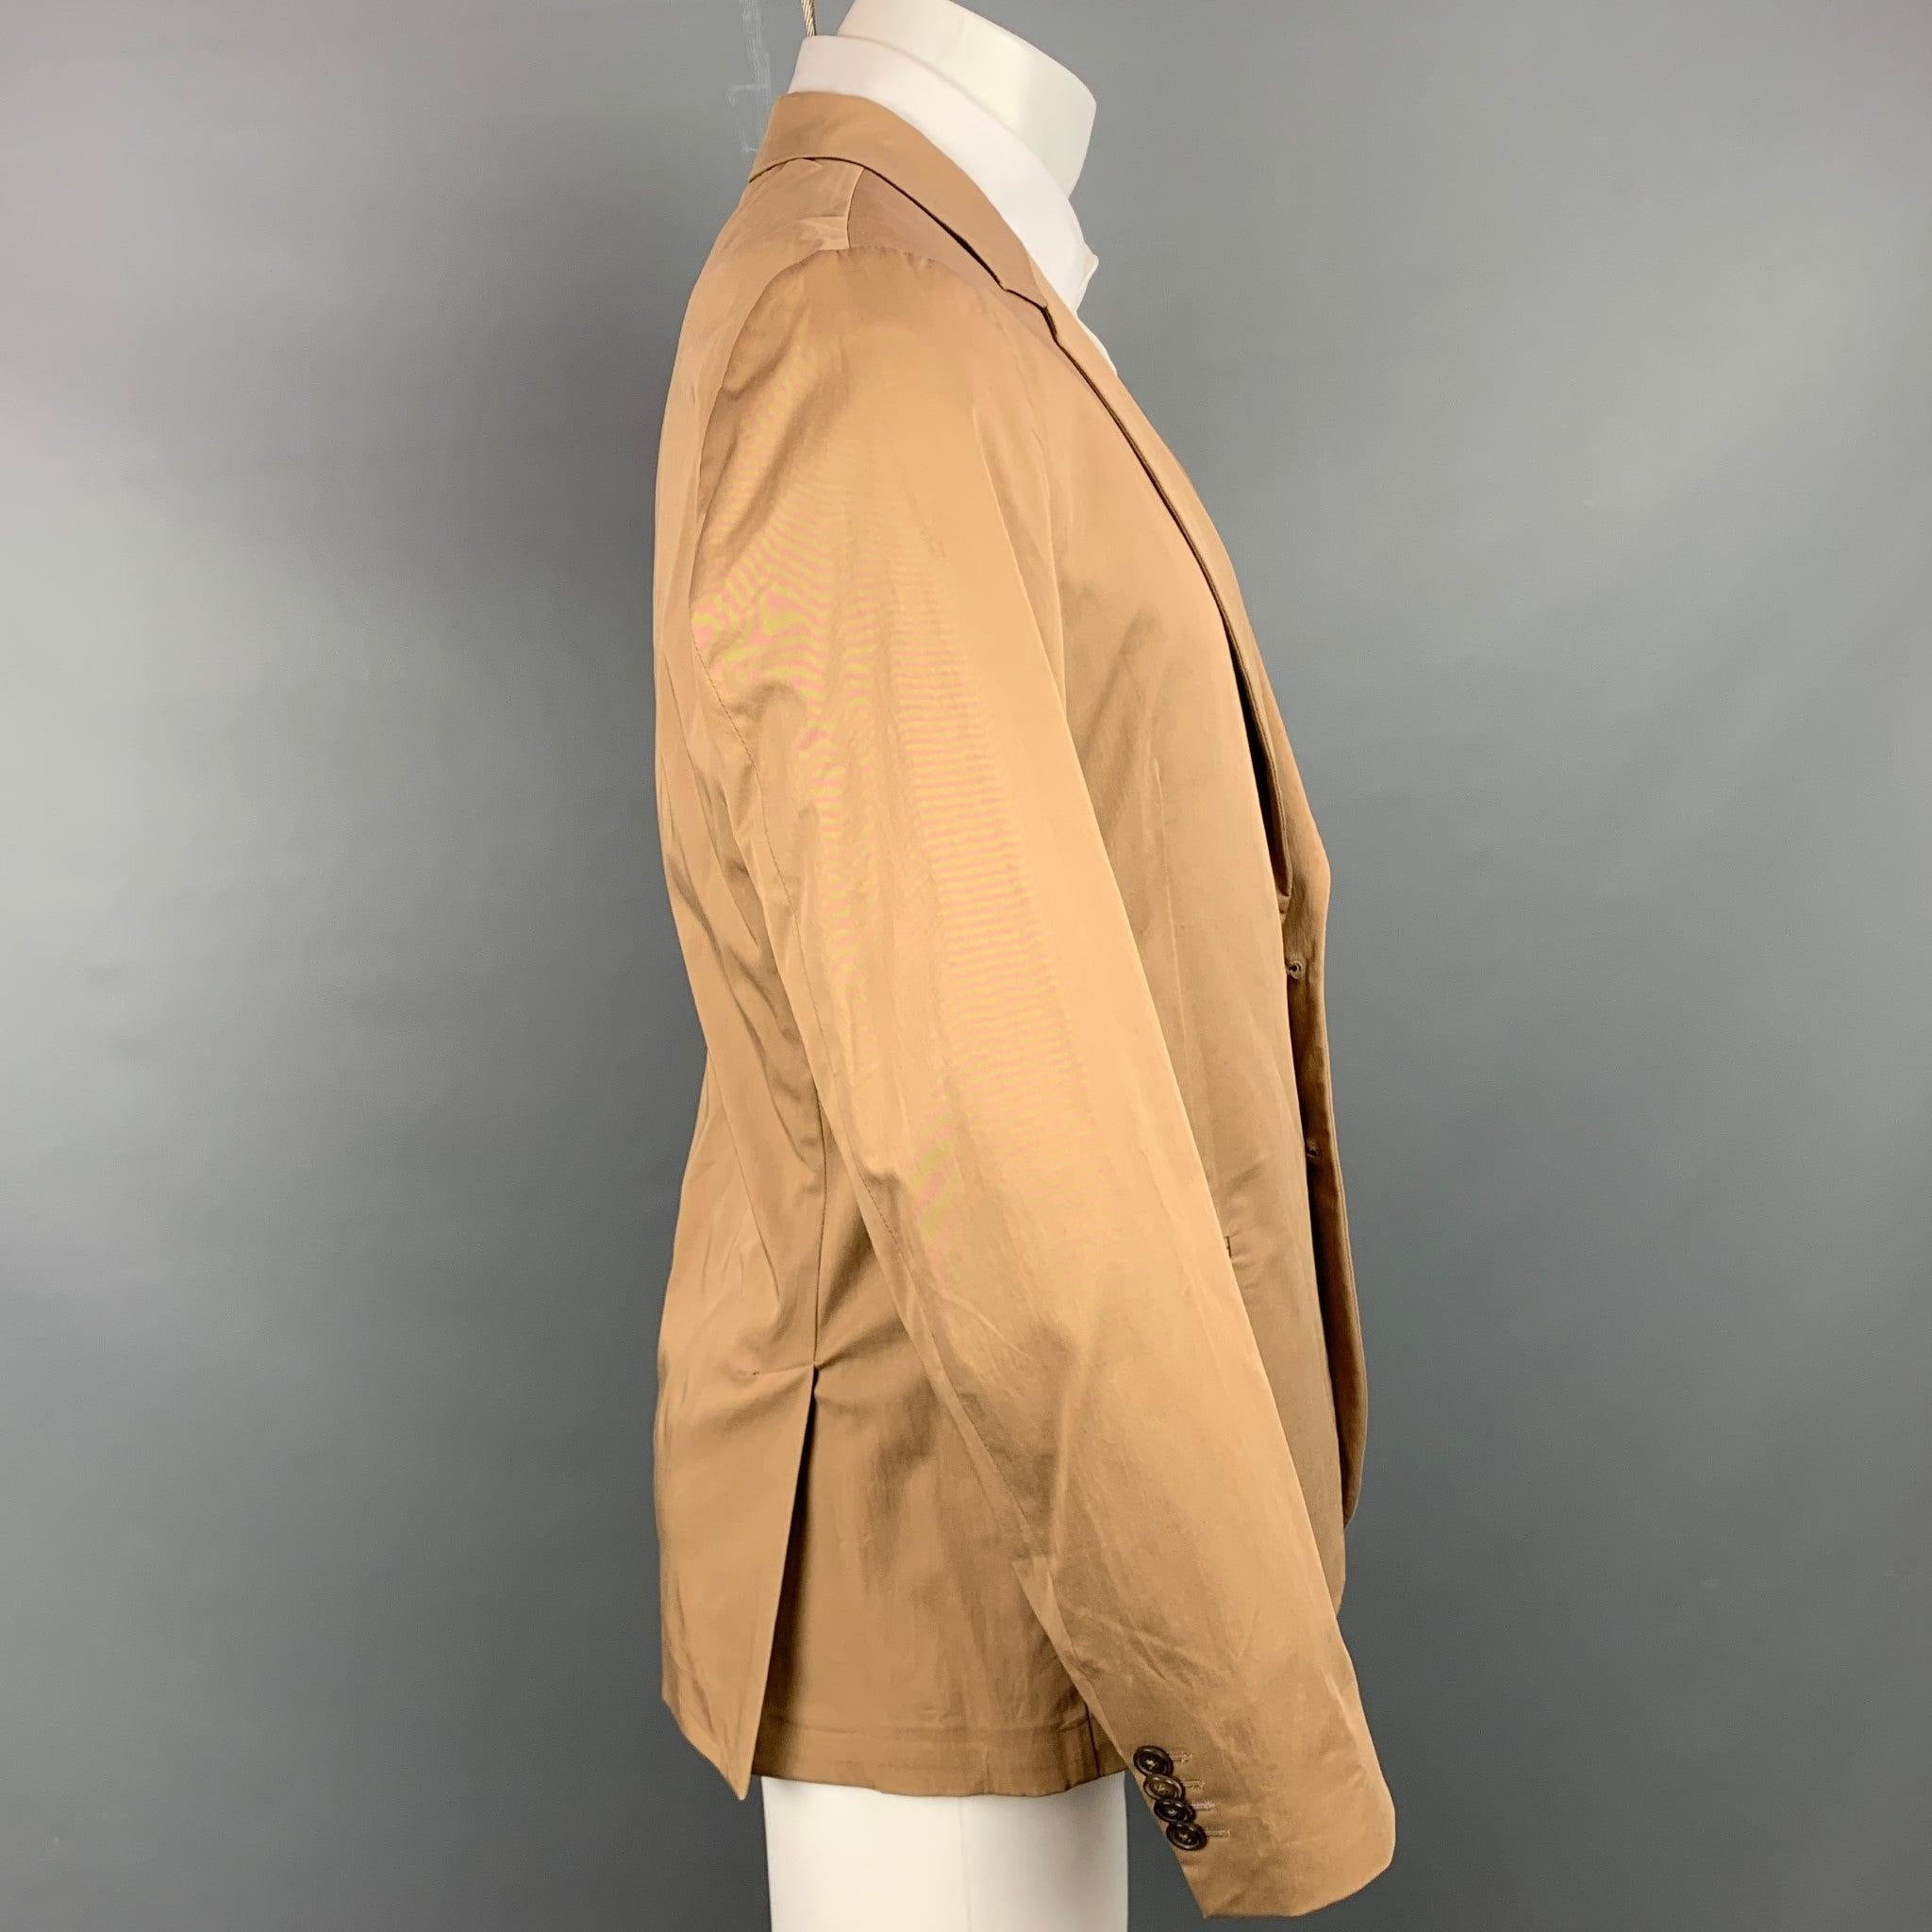 PAUL SMITH Soho Fit Size 40 Regular Tan Cotton Notch Lapel Sport Coat In Good Condition For Sale In San Francisco, CA